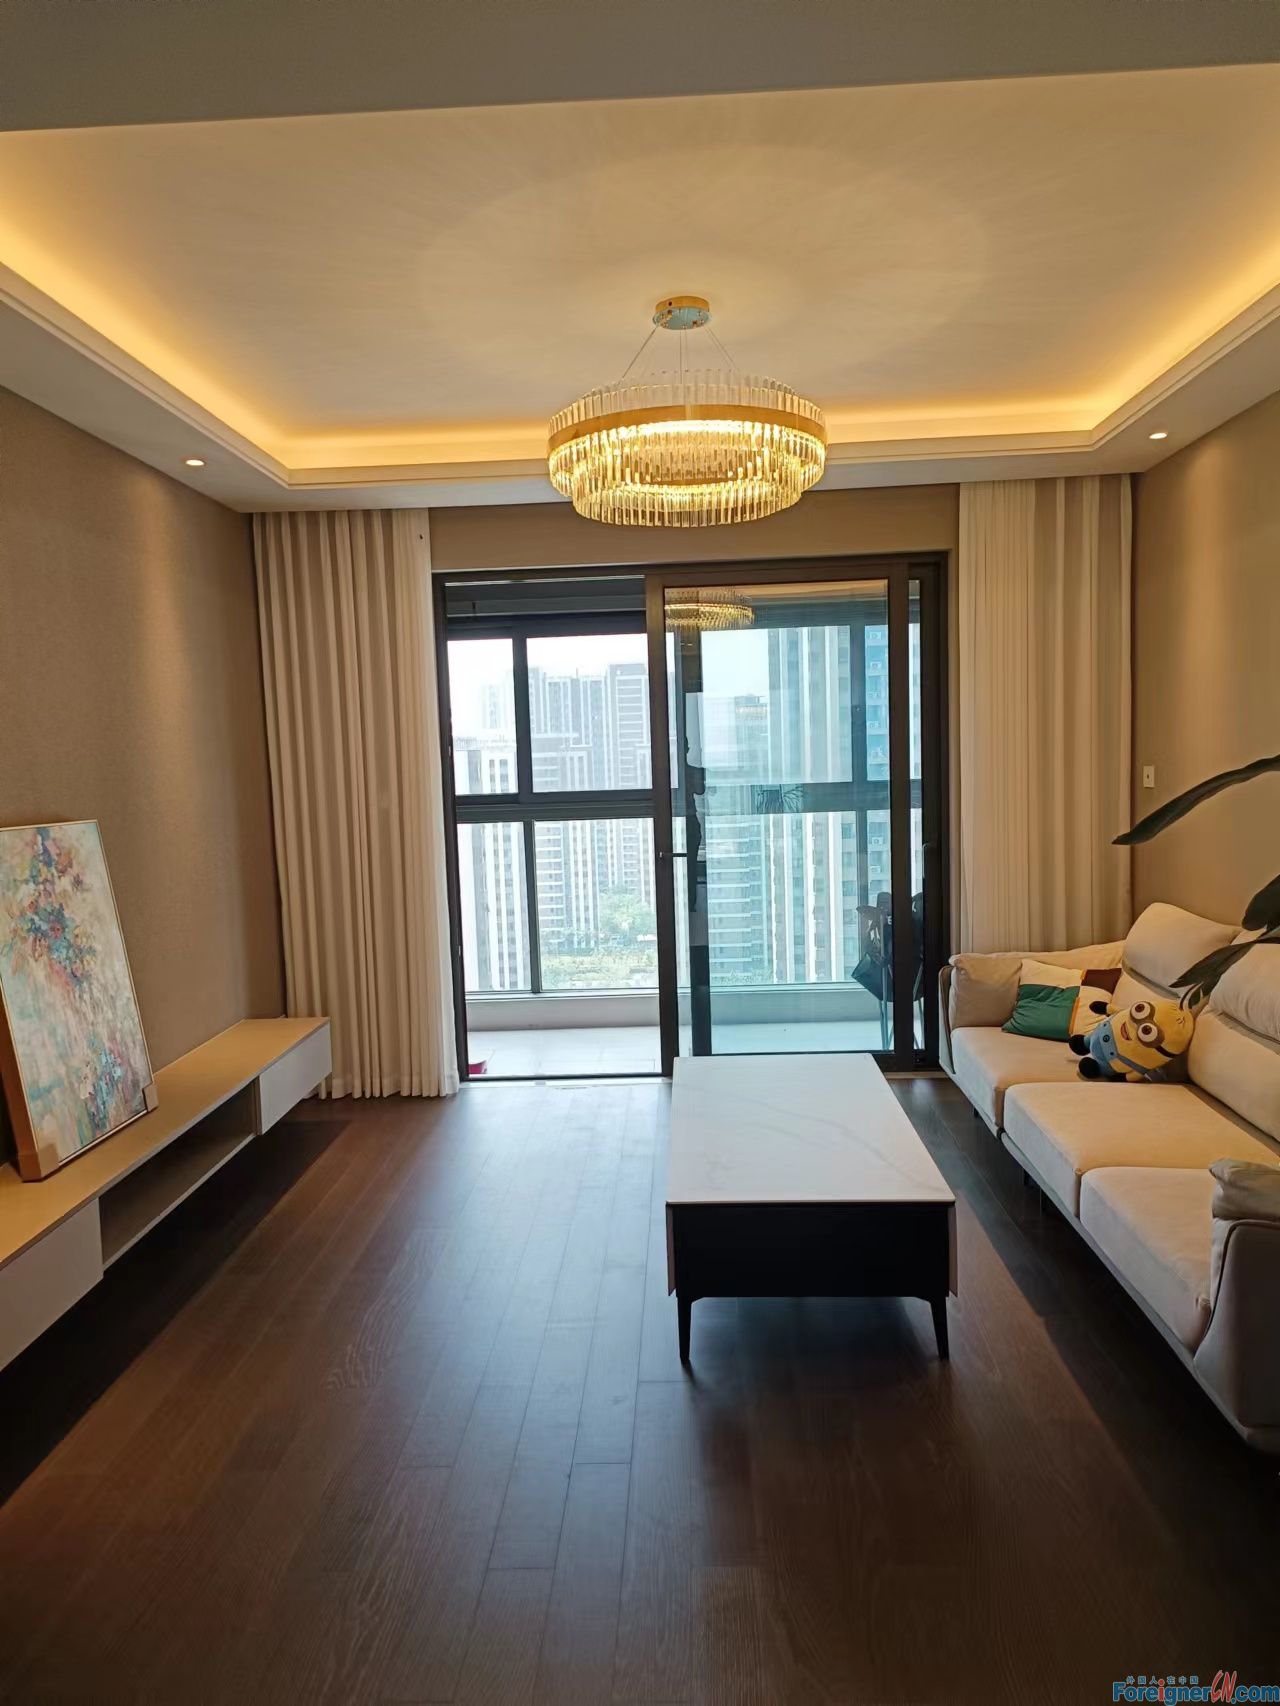 Stunning!! An  apartment is available for rent in Suzhou SND|3 bedrooms and 2 bathrooms|Central AC, floor heating|close to the Subway Station|Suzhou Foreign Language School Xiangcheng Campus.